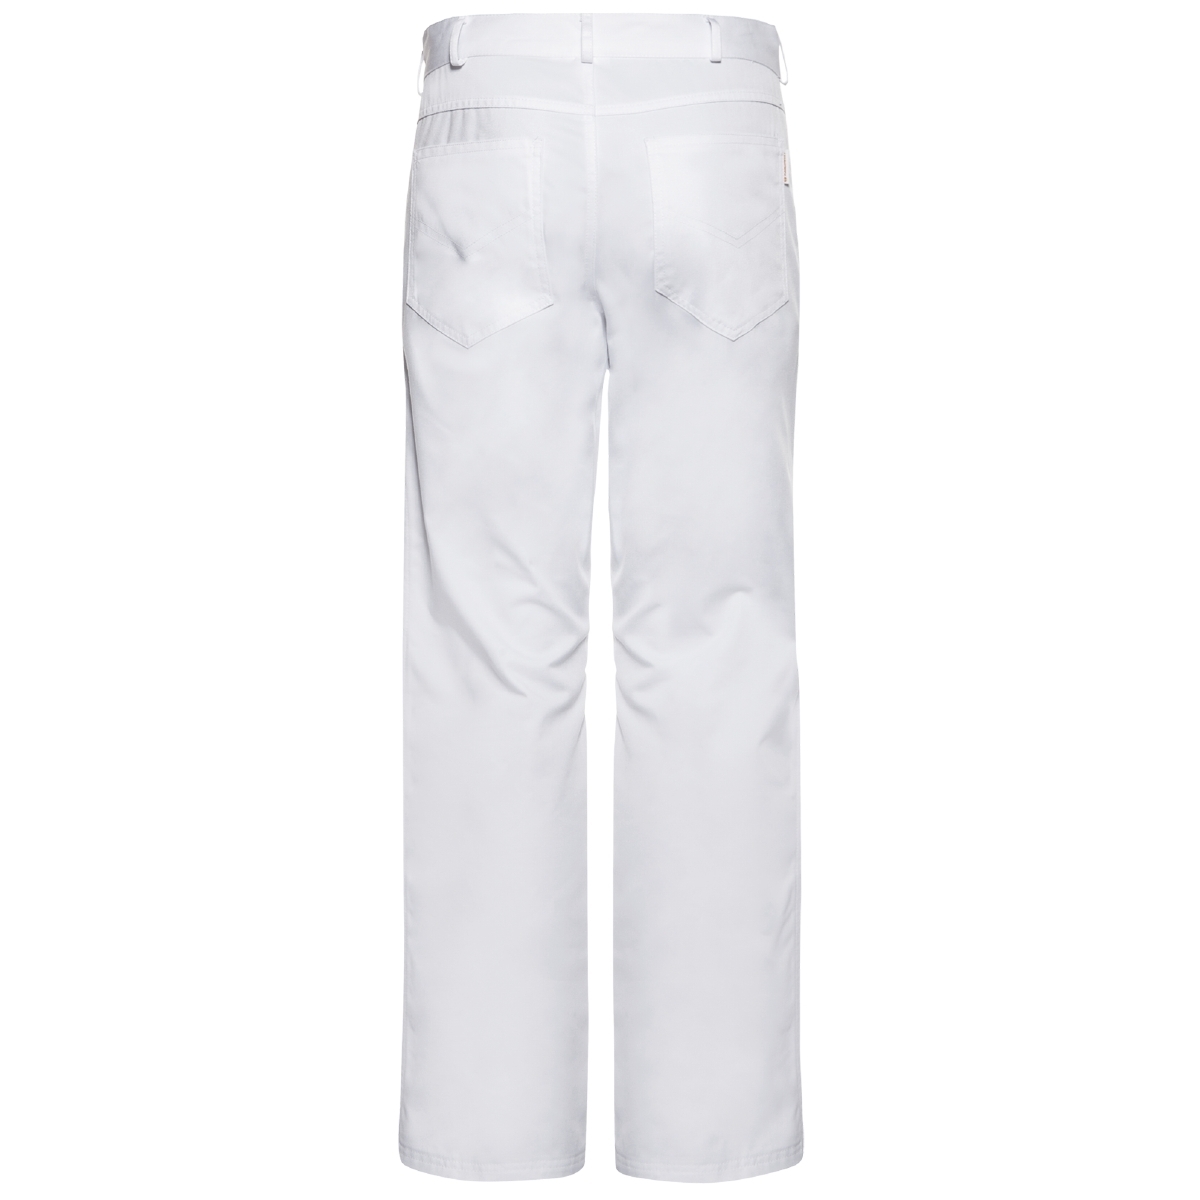 Karlowsky PASSION Herrenhose Manolo weiss